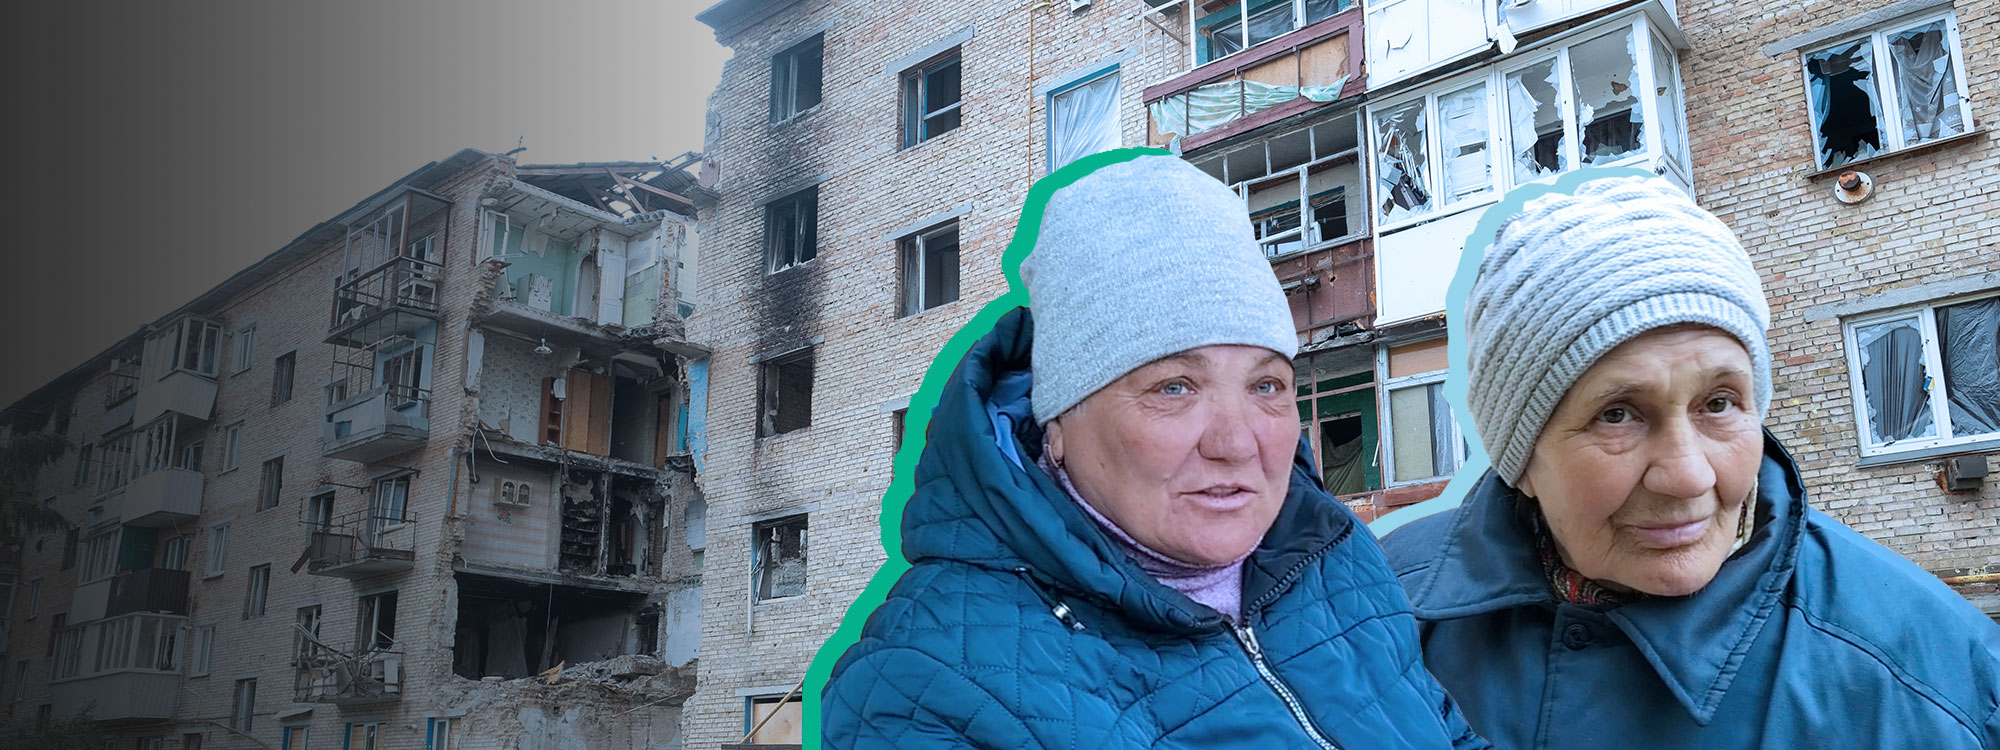 Two Ukrainian women in winter clothing, background is a bombed apartment building